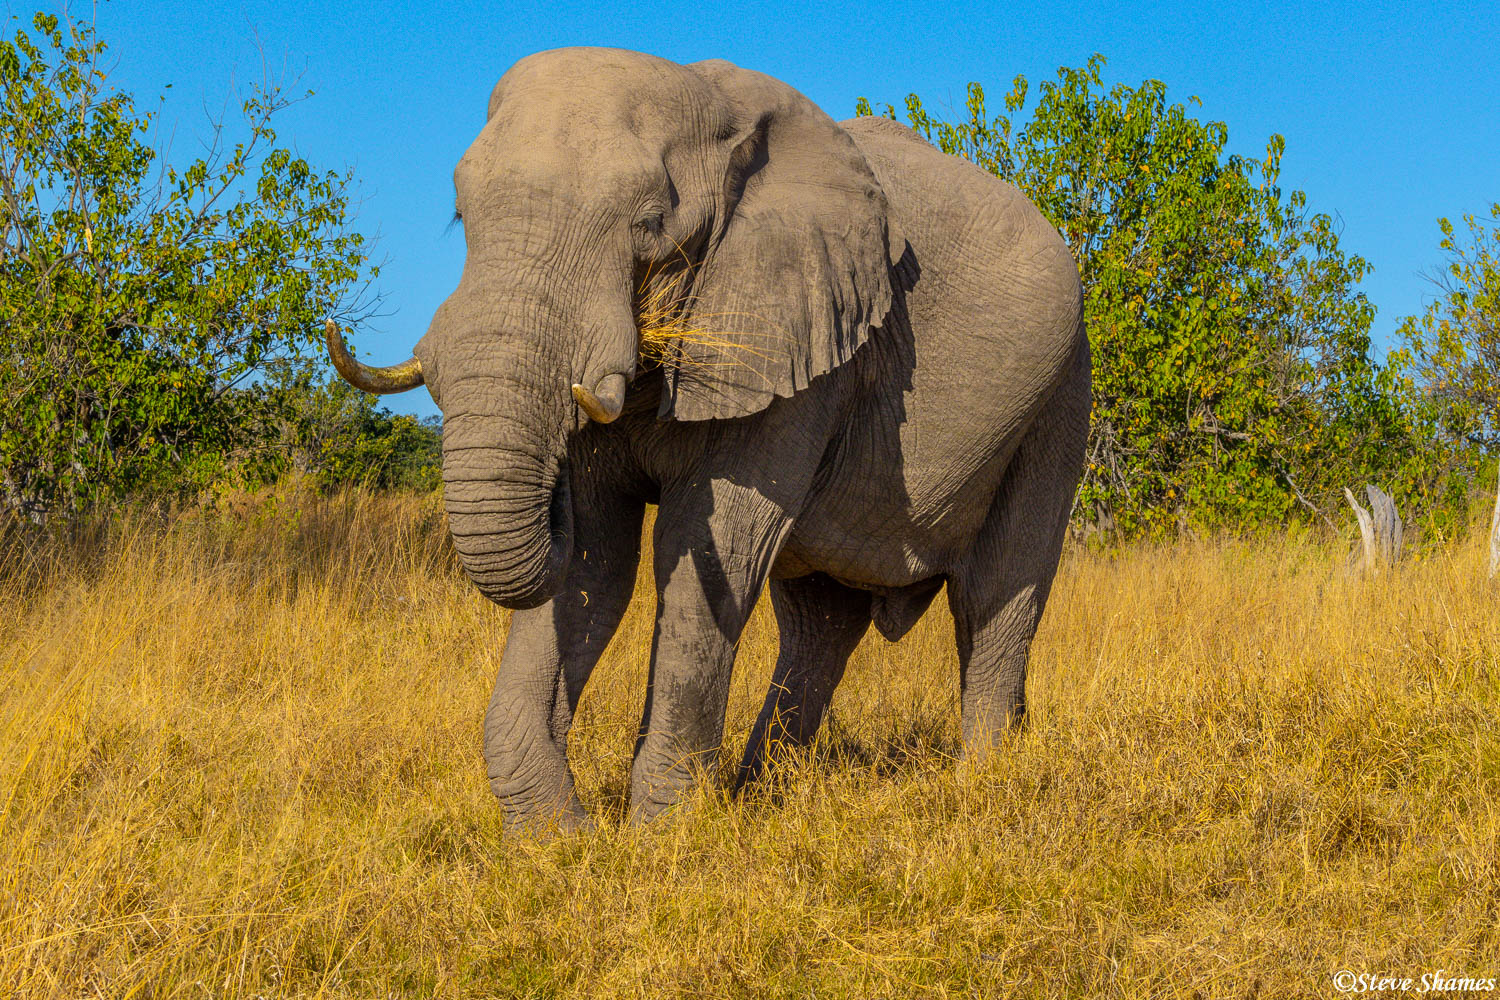 A Botswana elephant munching on some tasty grass at Moremi Game Reserve.